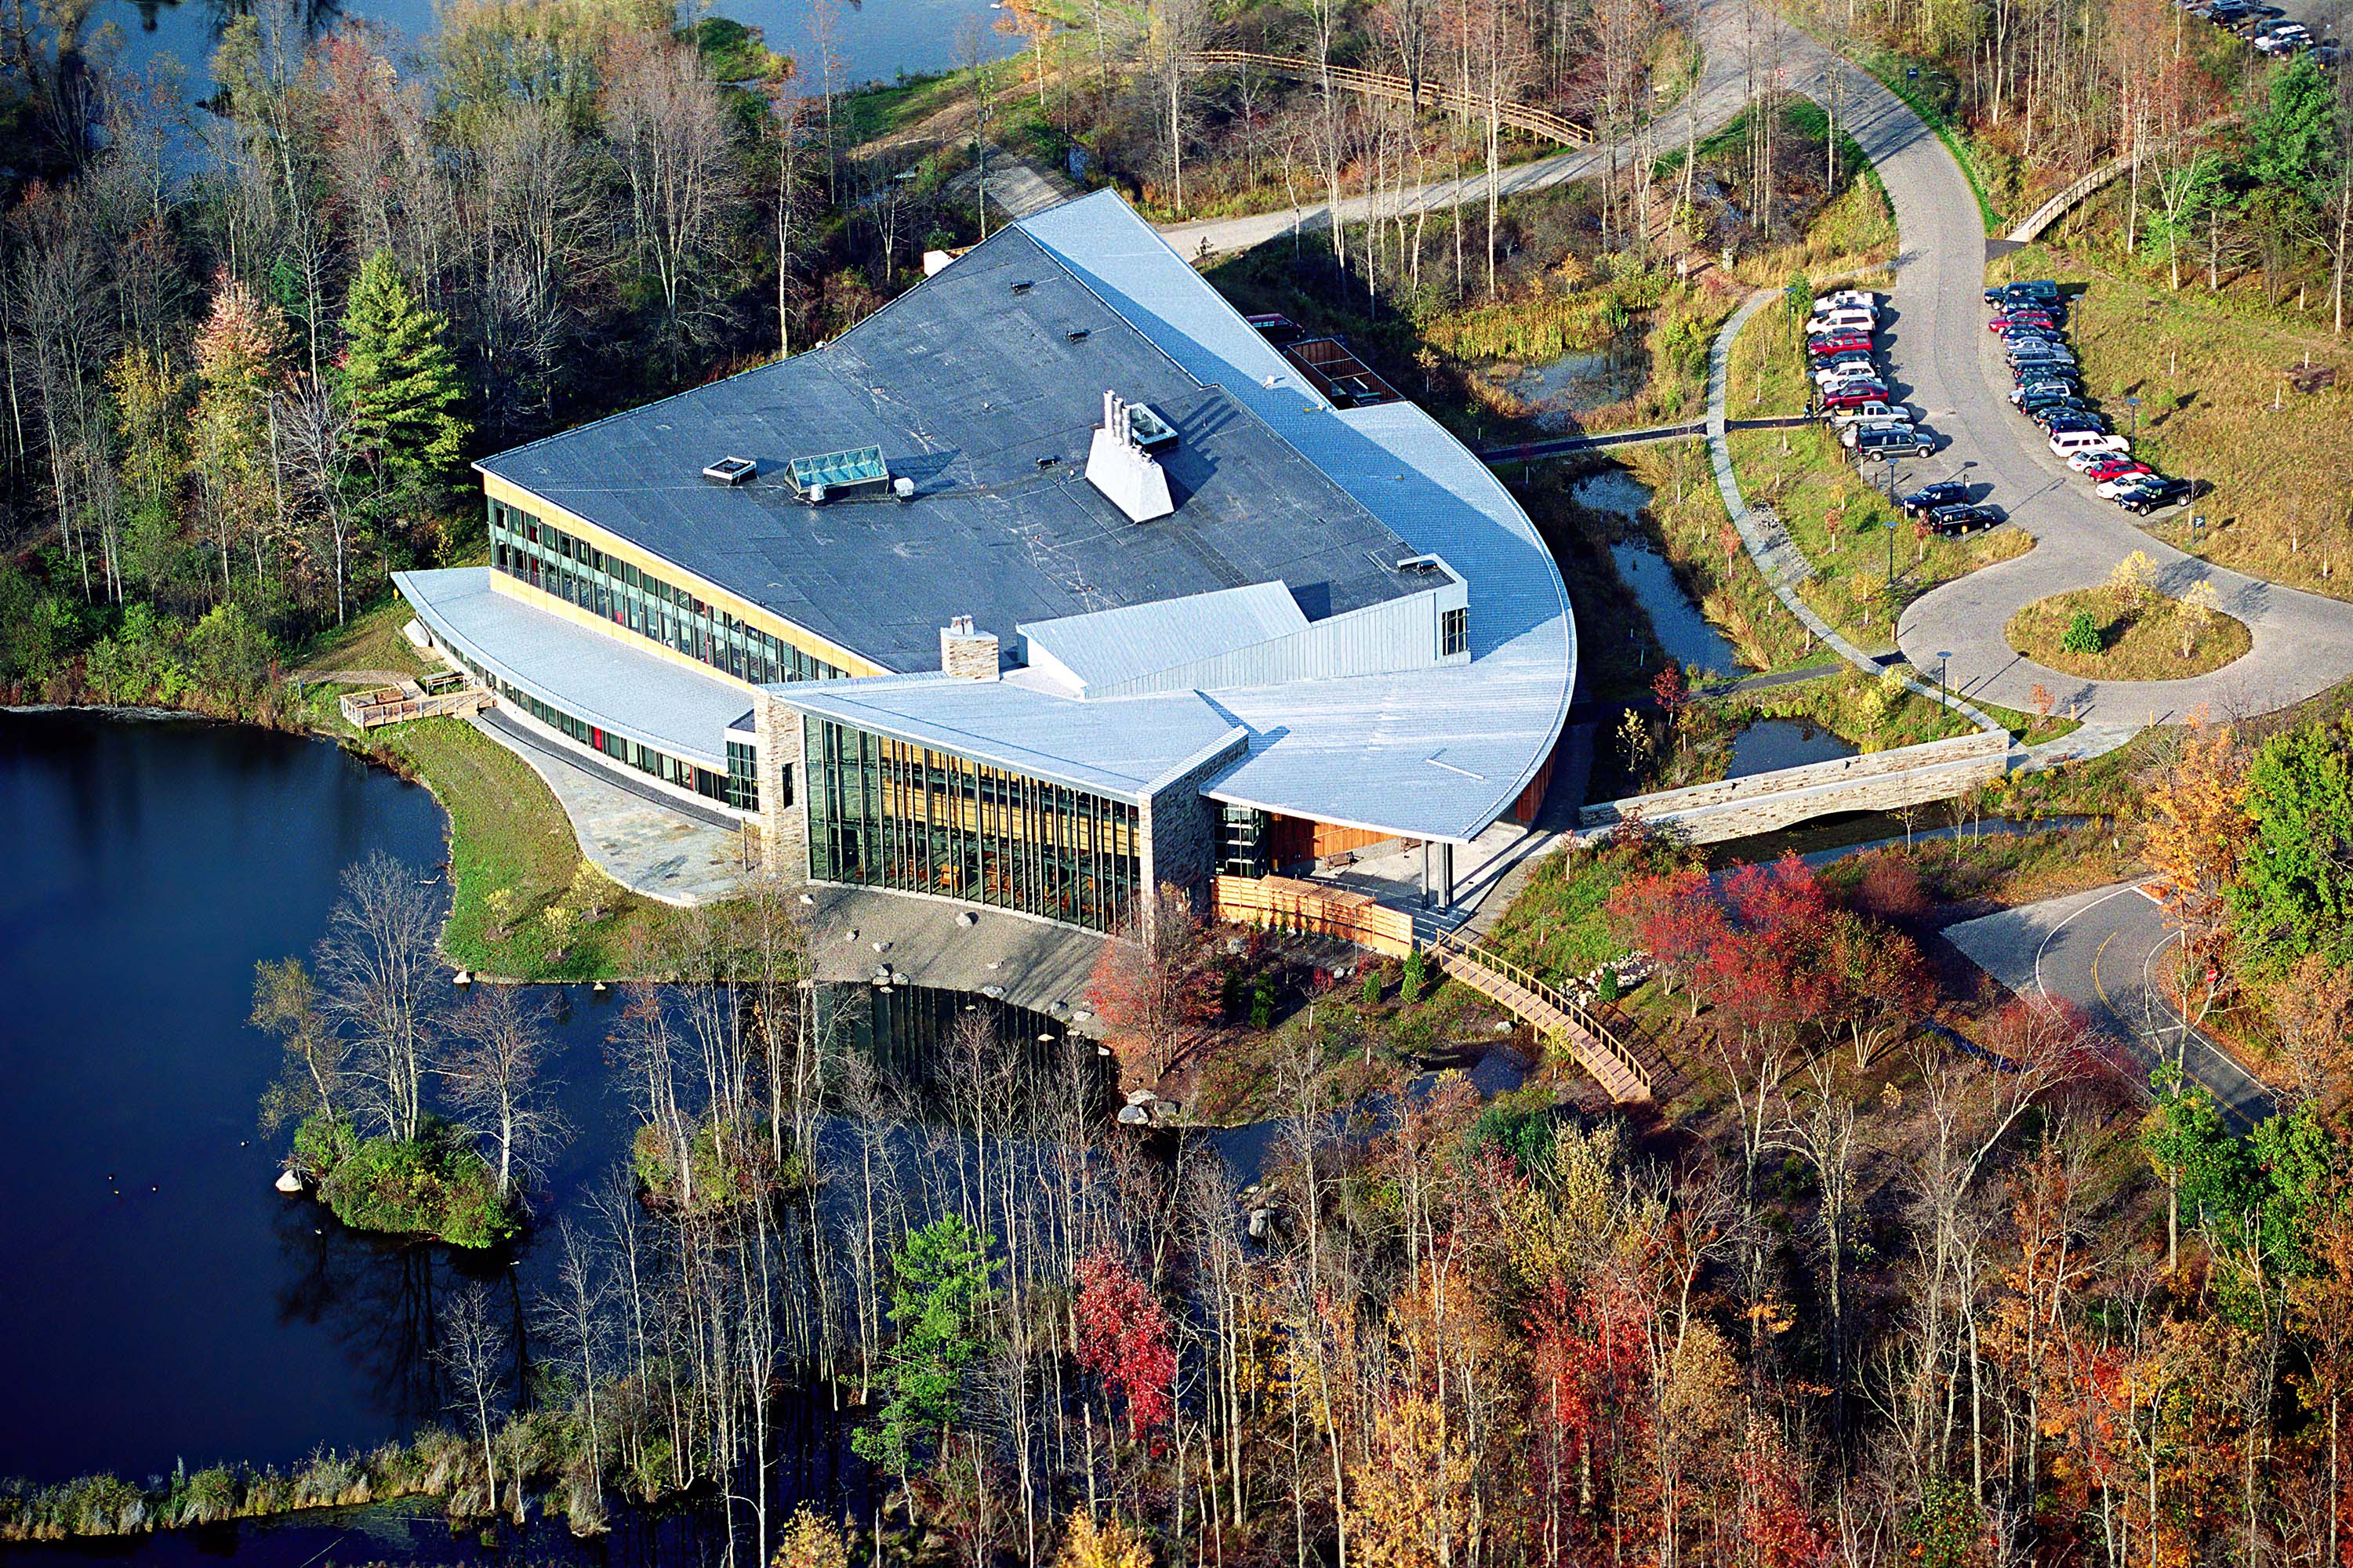 Aerial view of a building overlooking a large pond, surrounded by wooded areas.